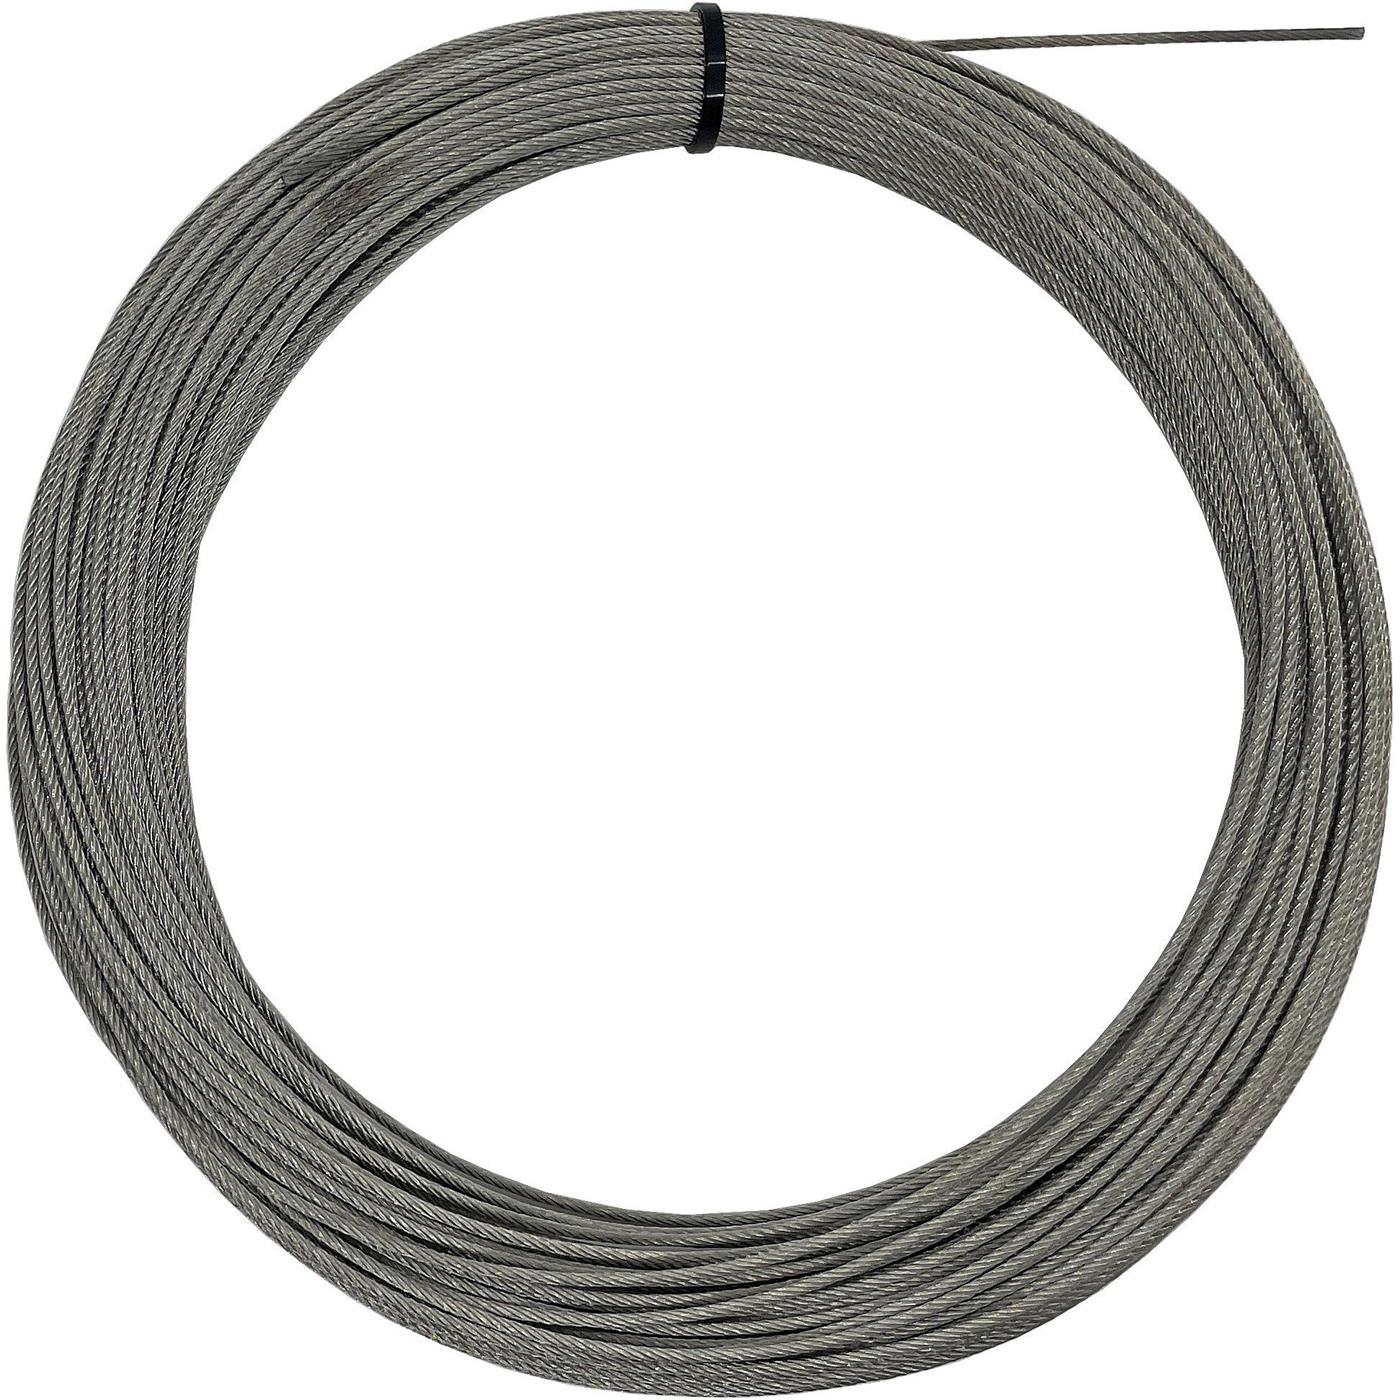 Wire rope 50m Stainless steel V4A 316 1,5mm 7x19 Ropes stainless for trellis systems